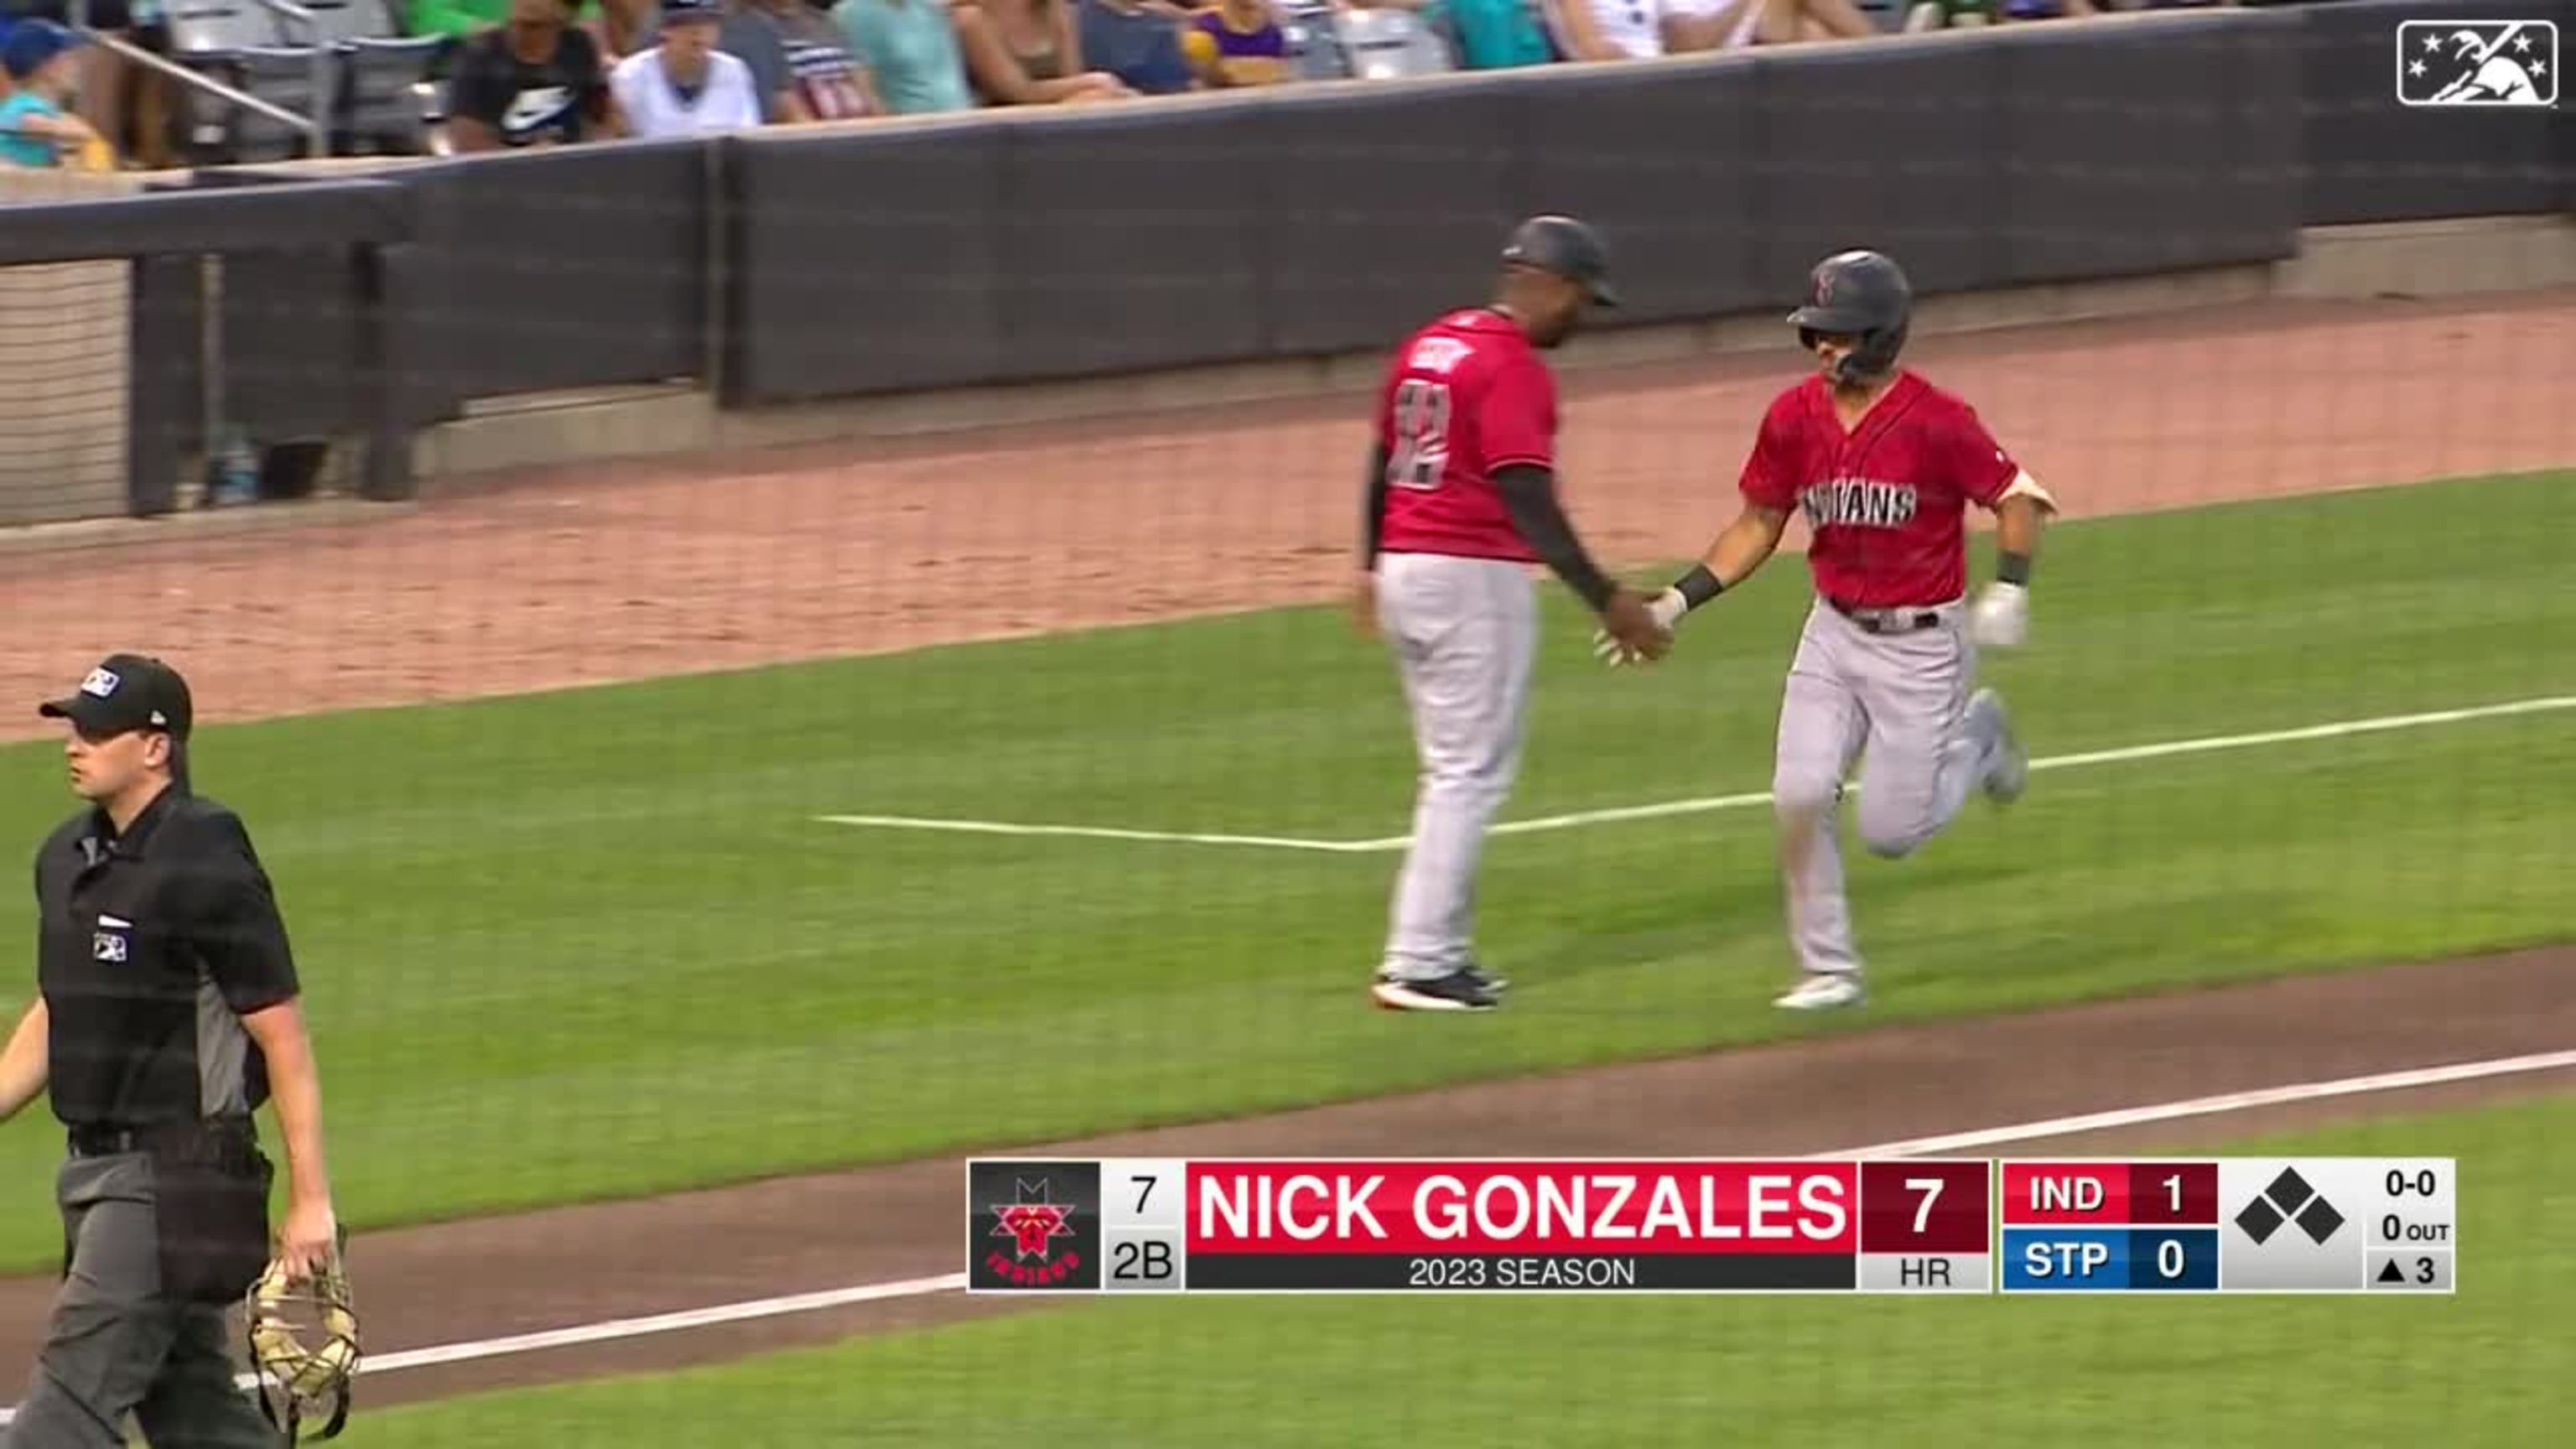 Rookie Gonzales homers and triples in his home debut as the